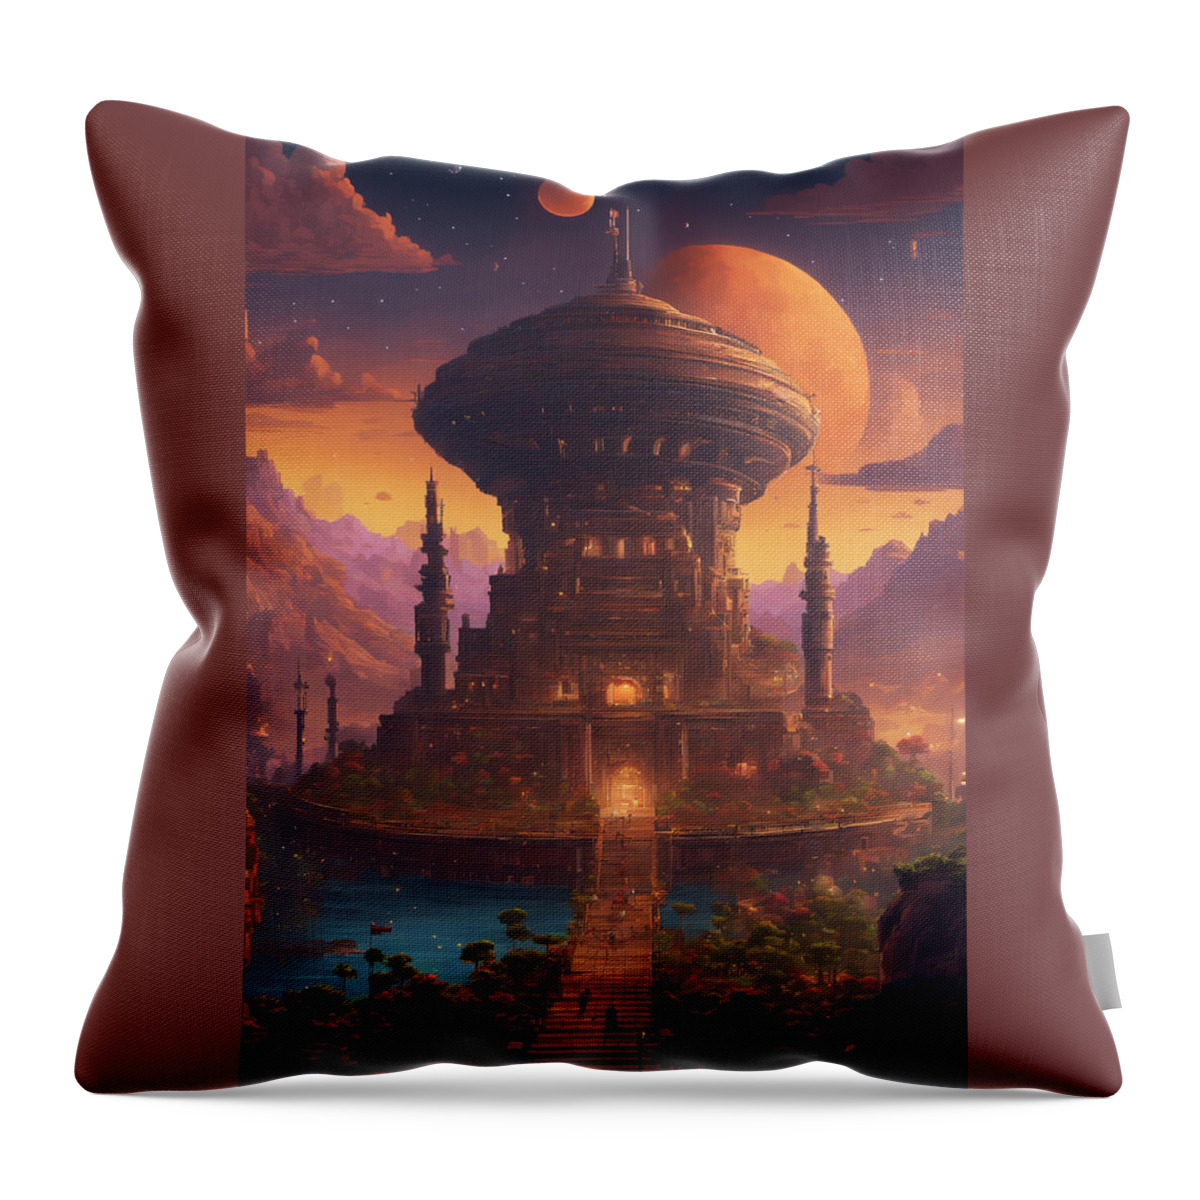 Pixel Throw Pillow featuring the digital art Somewhere by Quik Digicon Art Club